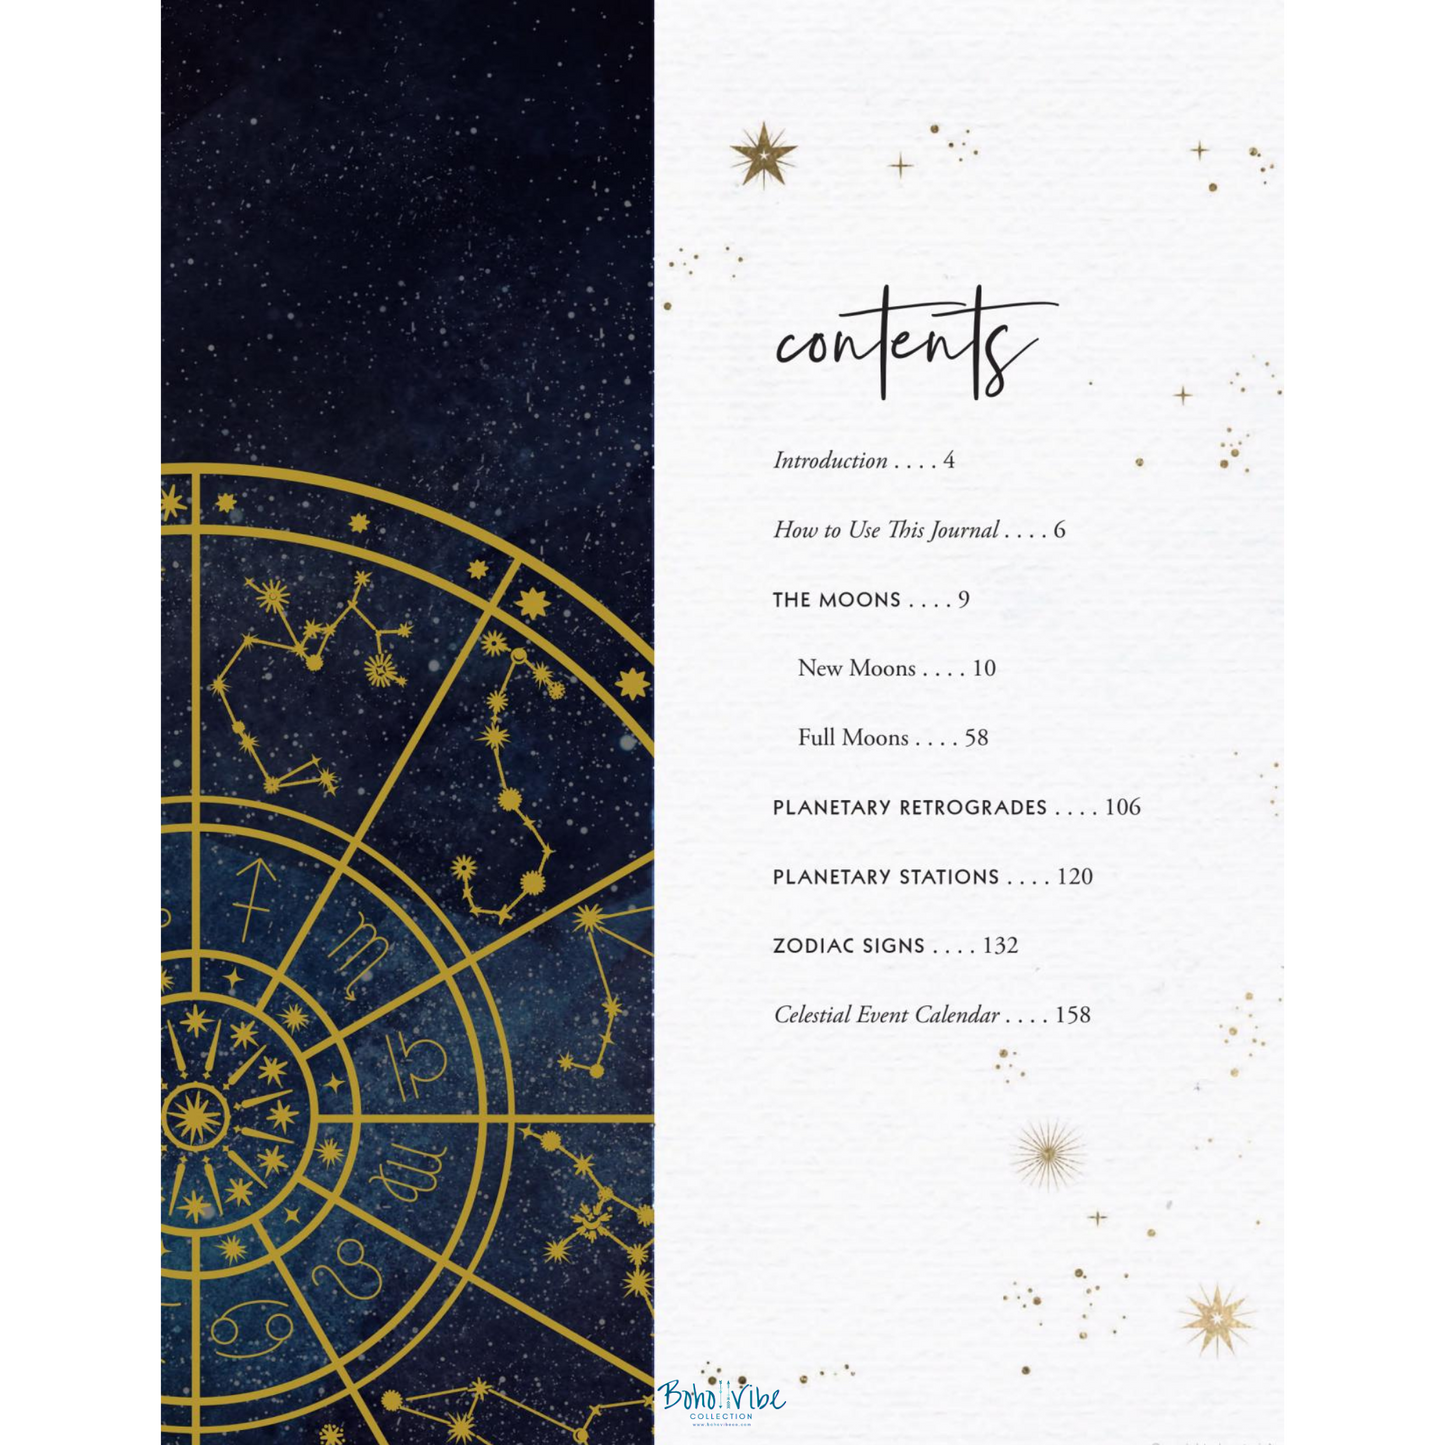 Boho ↡↟ Vibe Collection ↠ Astrological Self-Care Journal. Astrology Journal